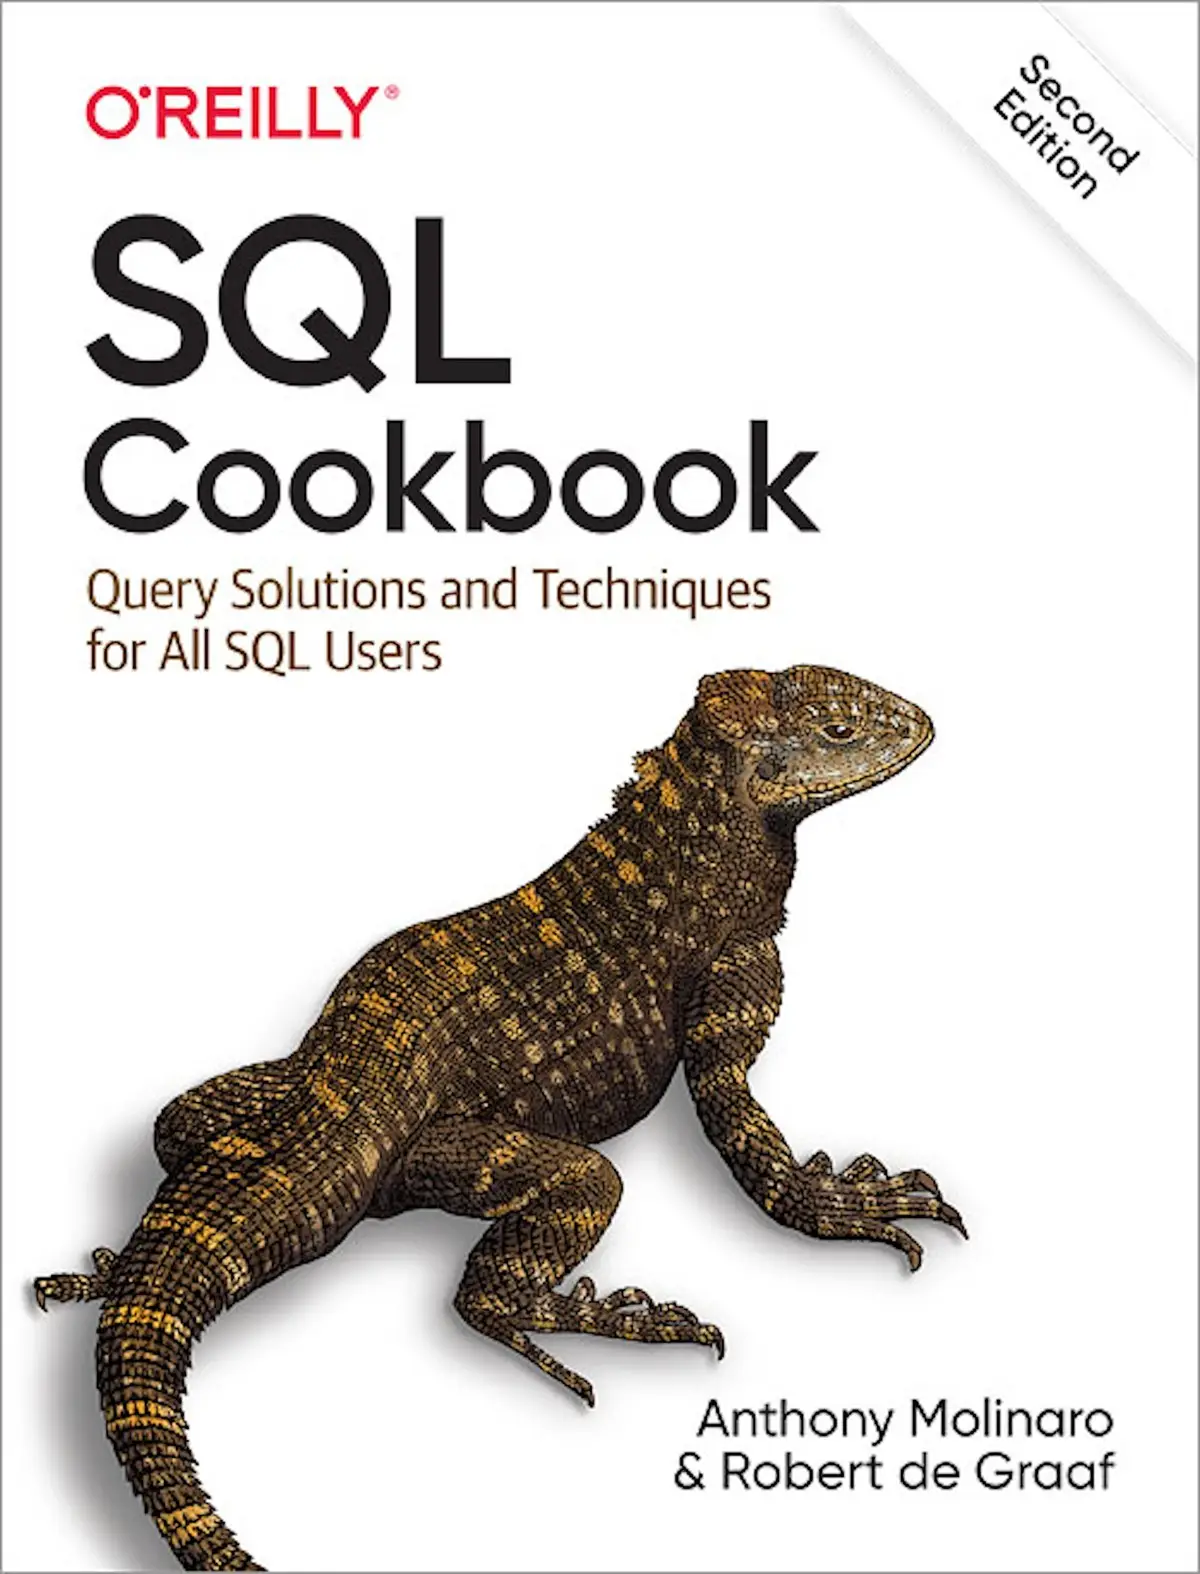 SQL Cookbook: Query Solutions and Techniques for All SQL Users, 2nd